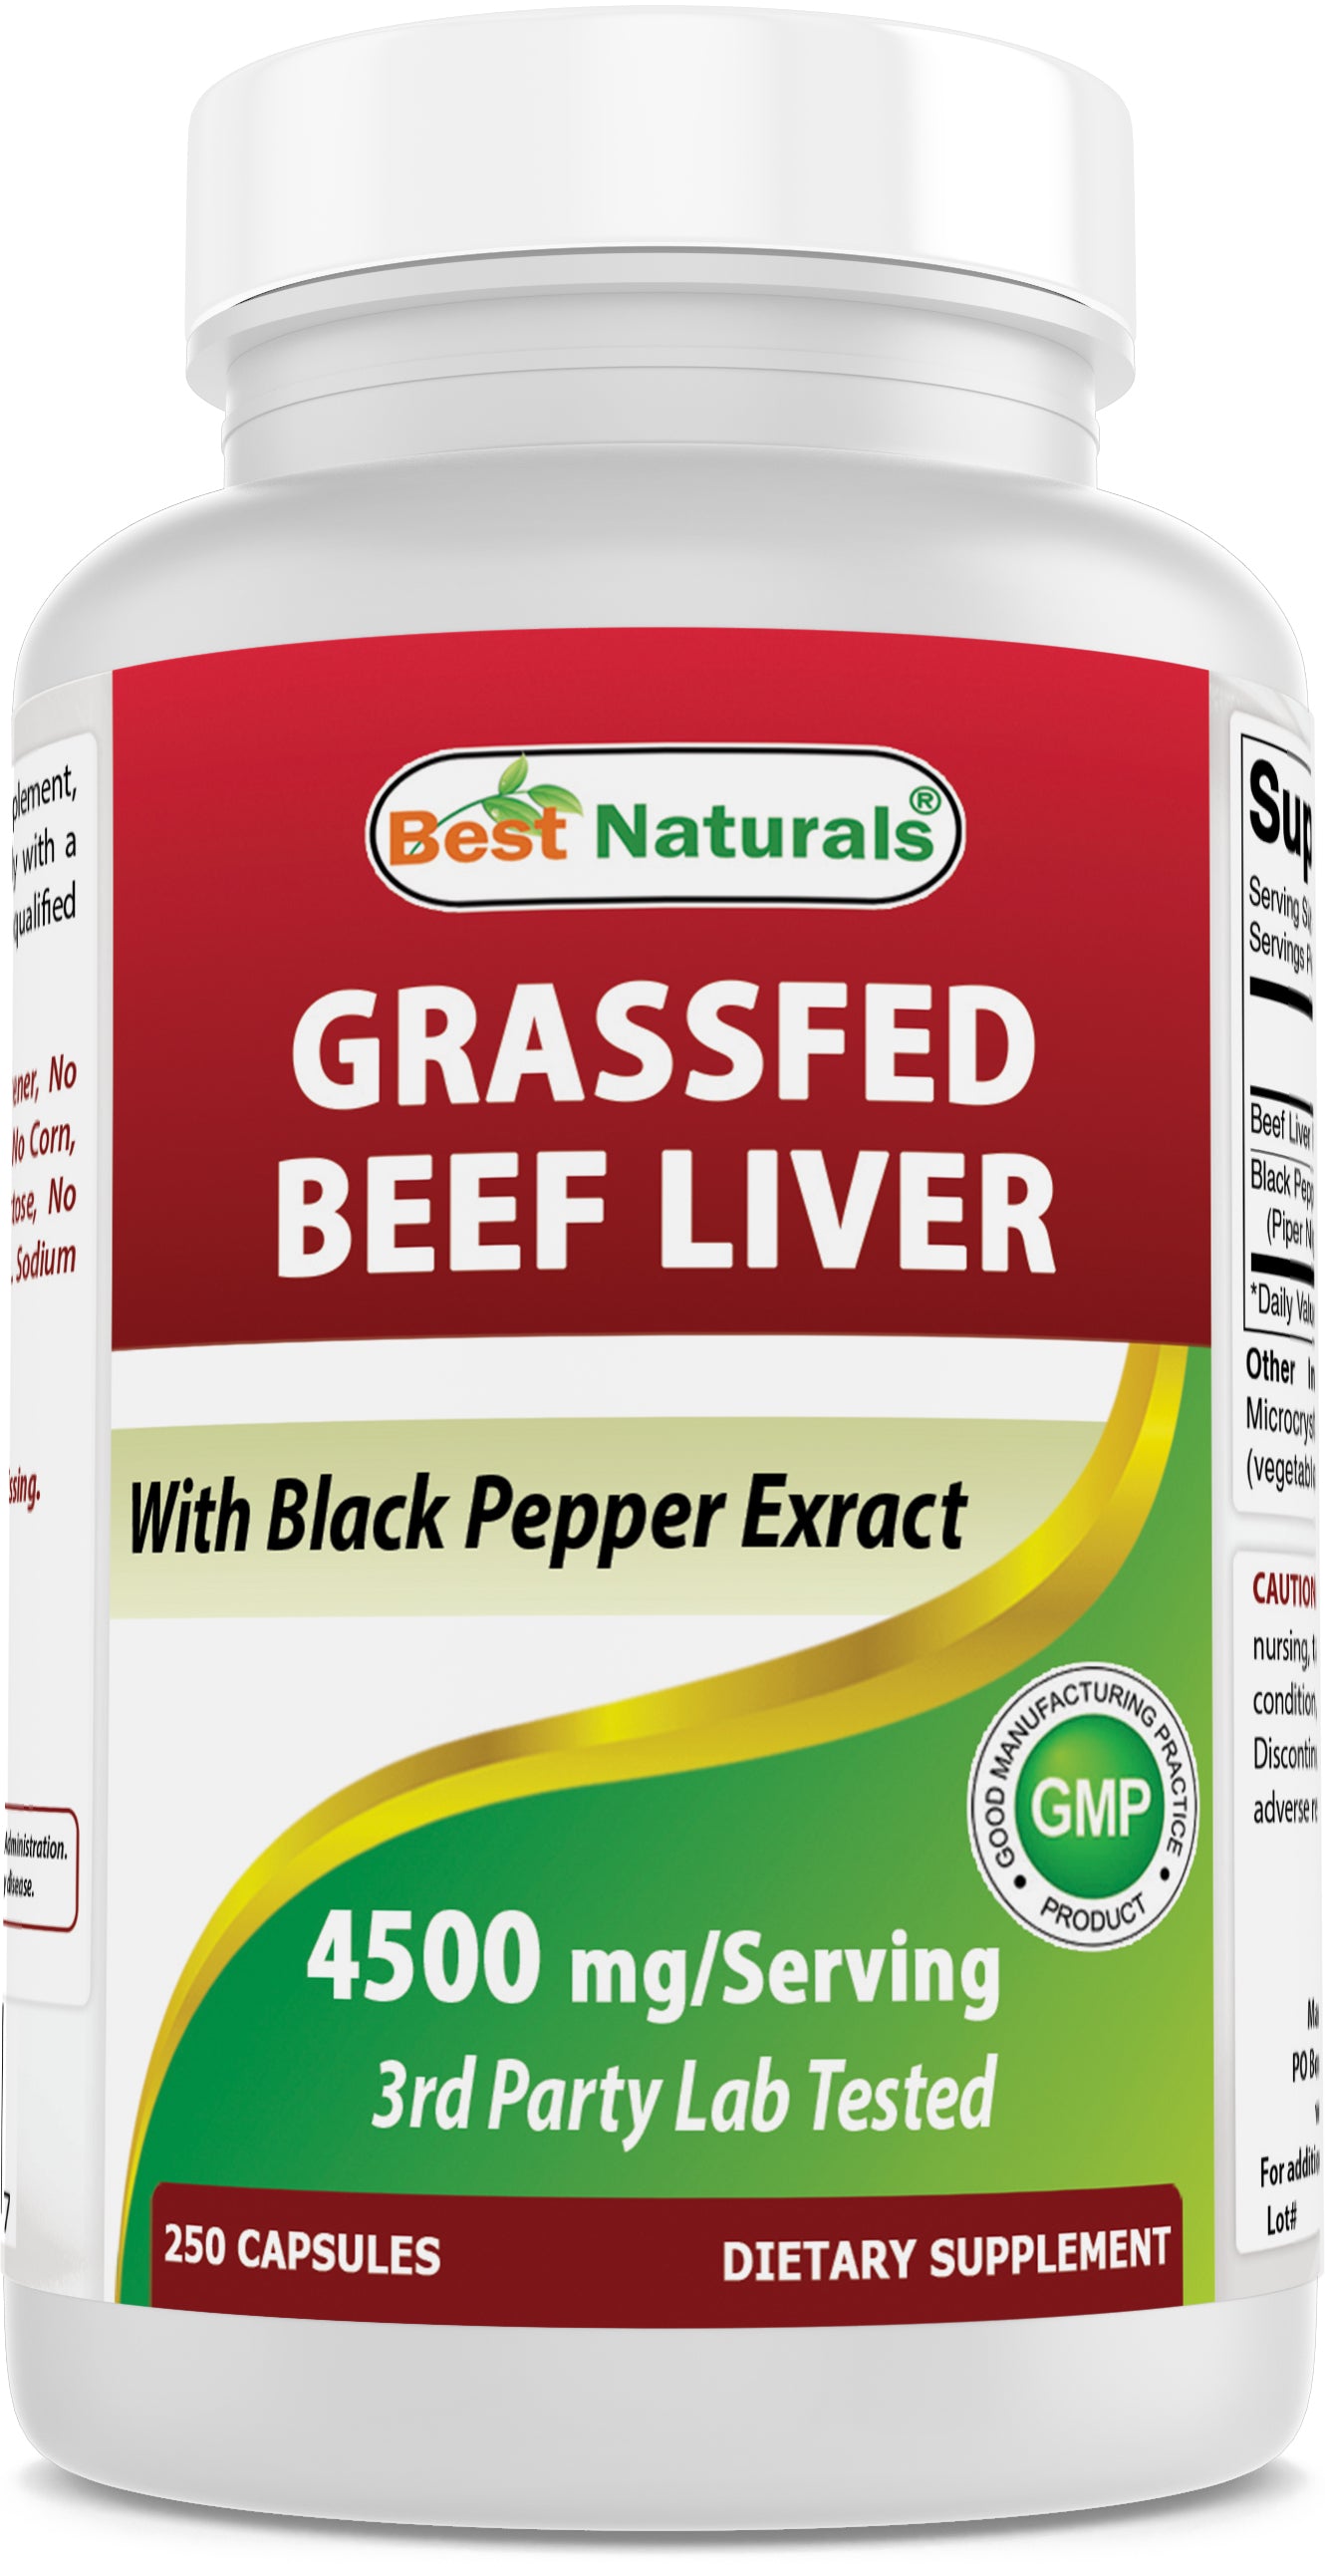 Best Naturals Grass Fed Beef Liver Capsules 4500mg 250 Count ...